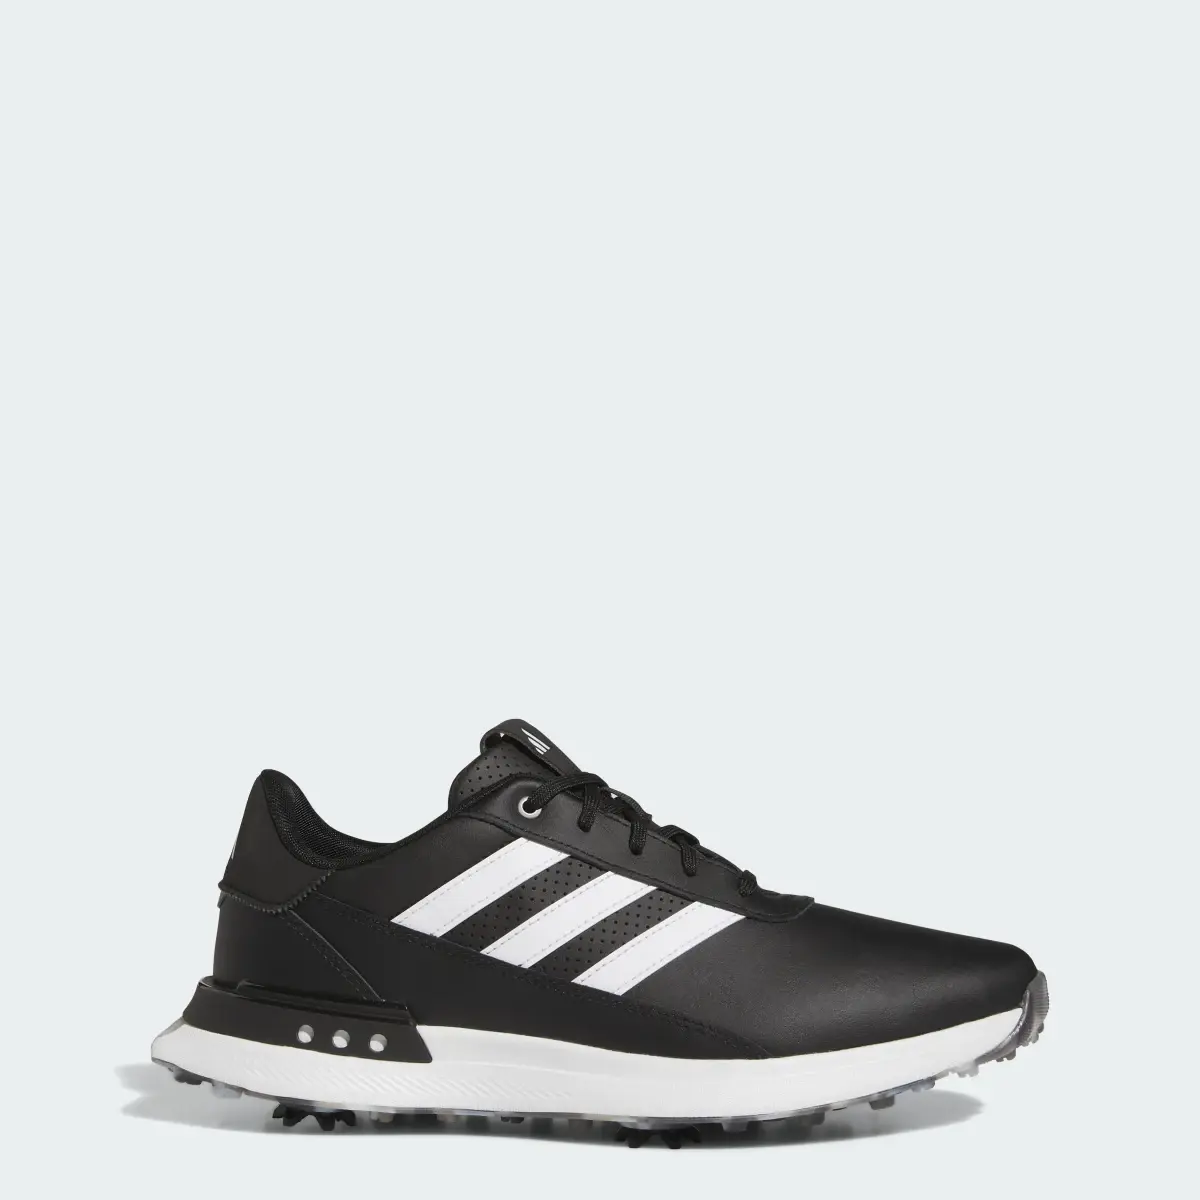 Adidas S2G 24 Golf Shoes. 1